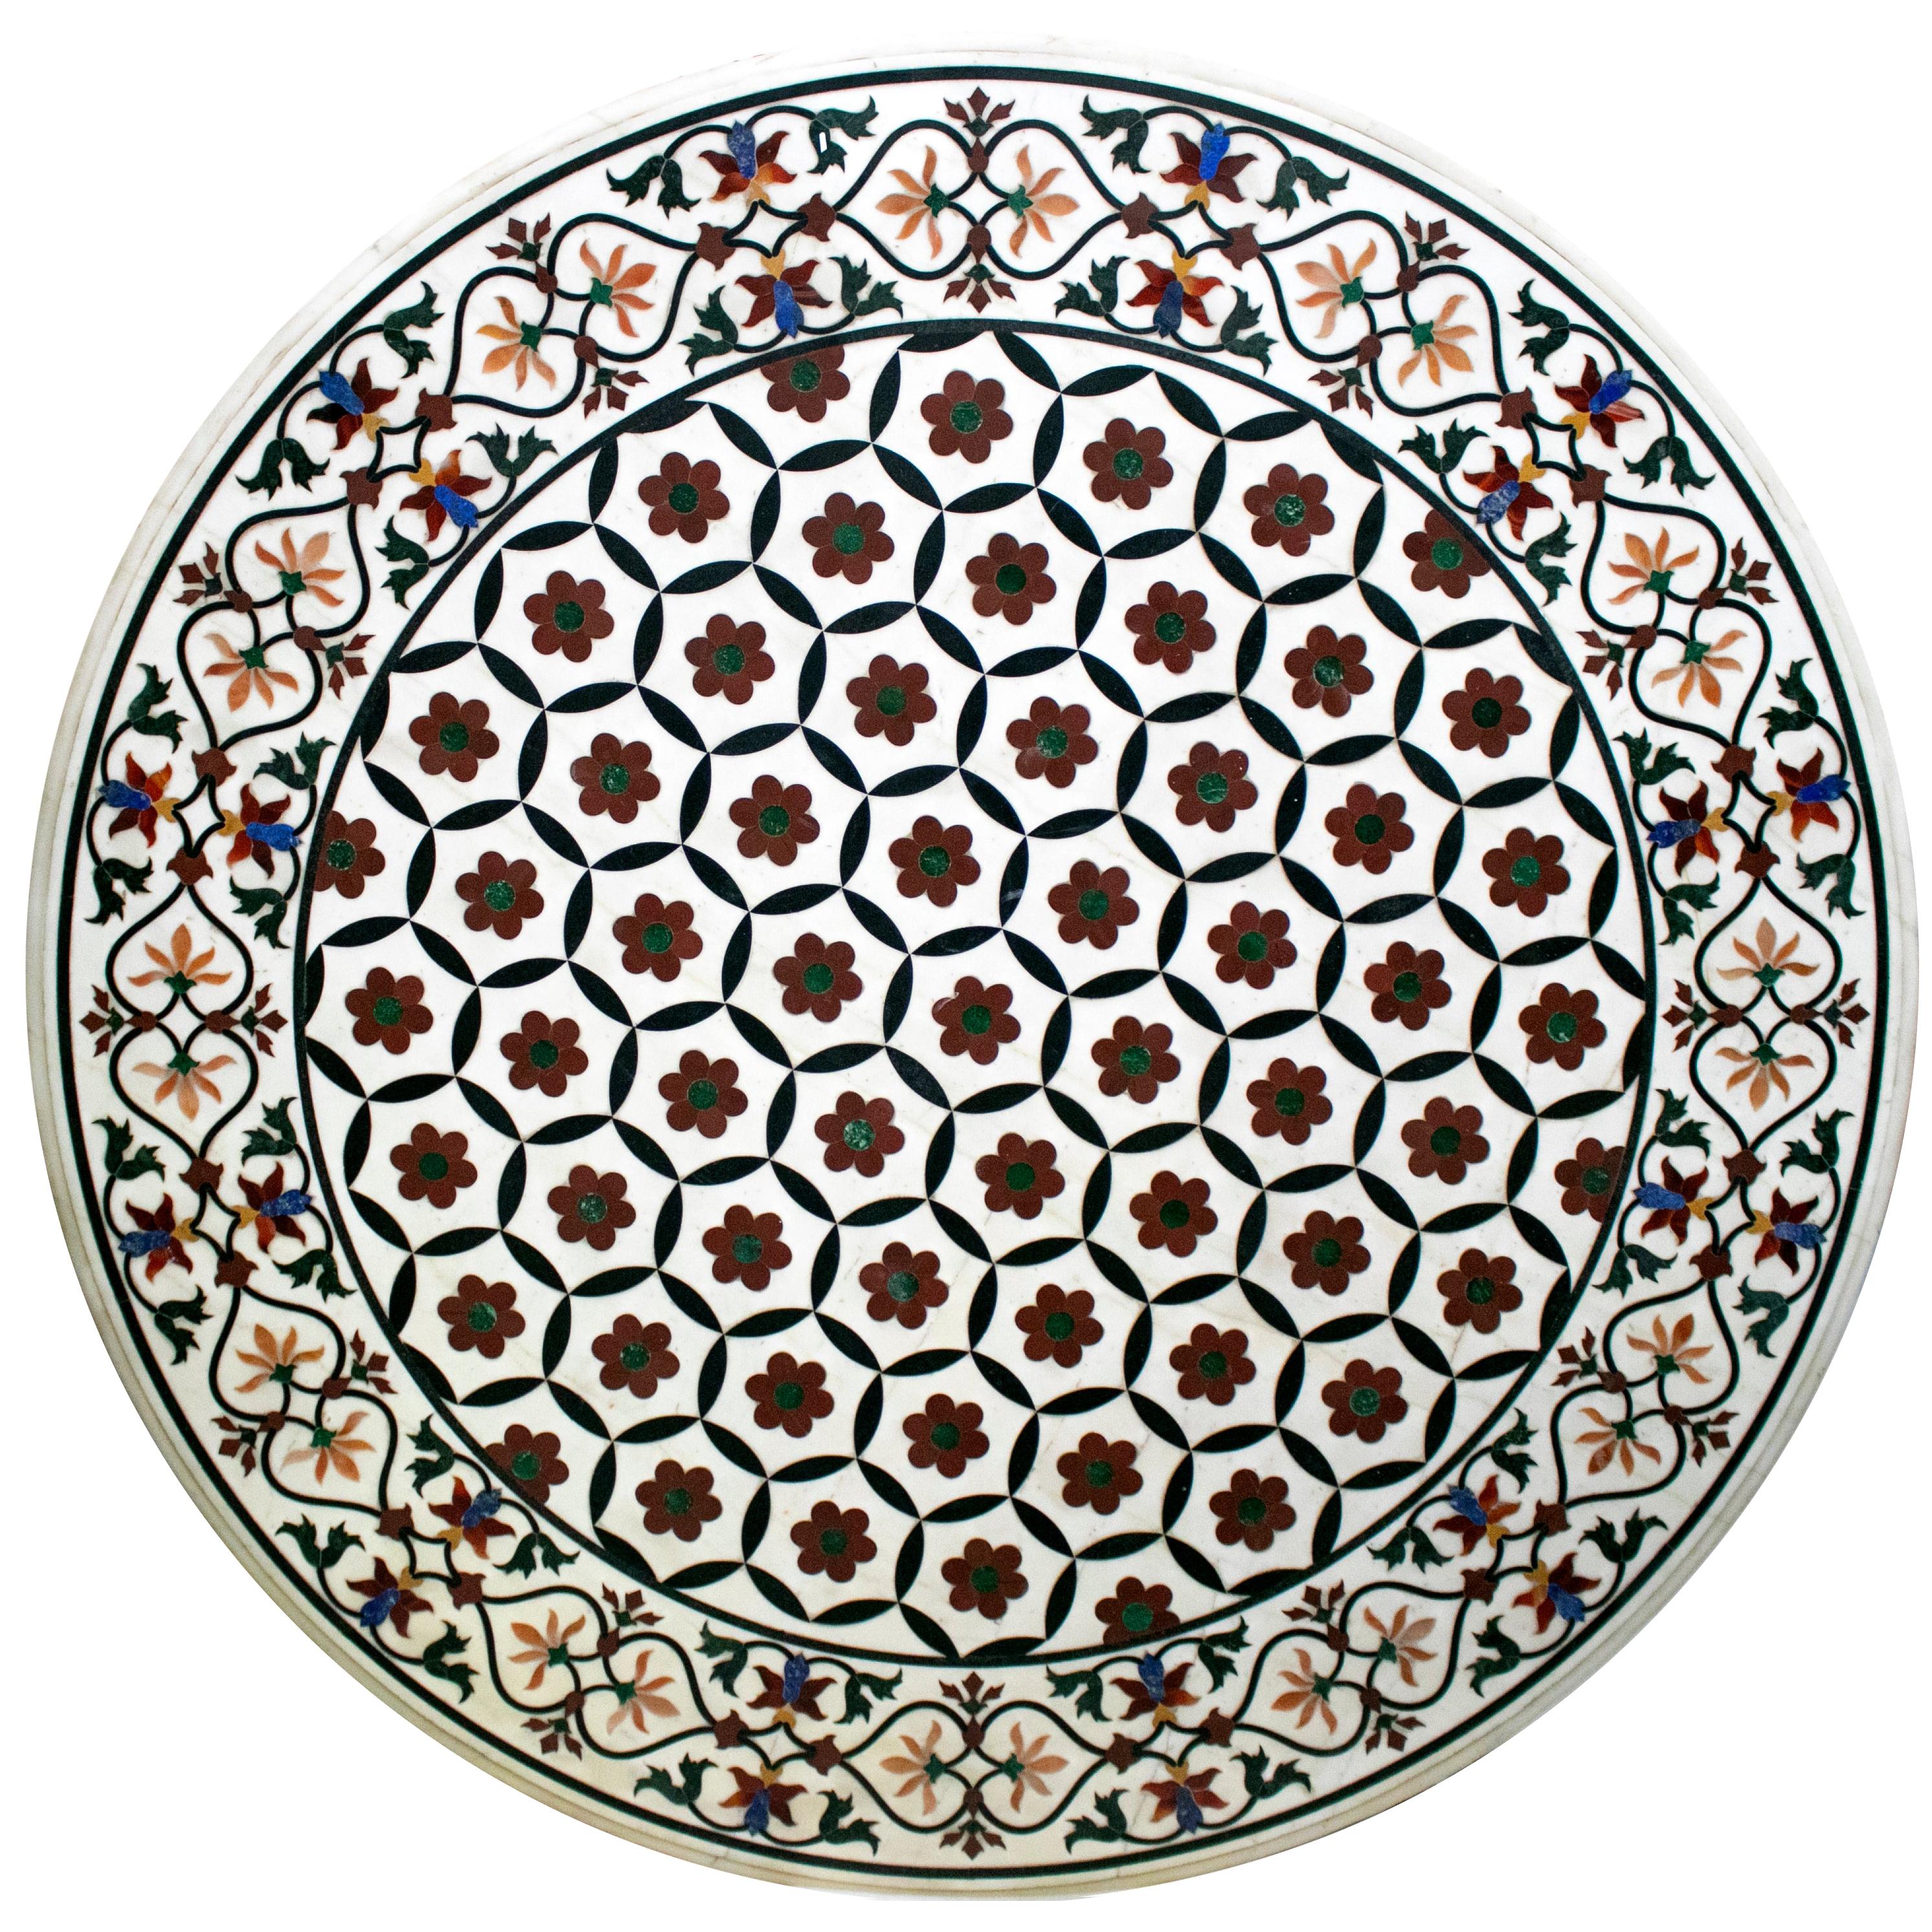 Round Pietre Dure Geometric White Marble Mosaic Table Top with Inlays